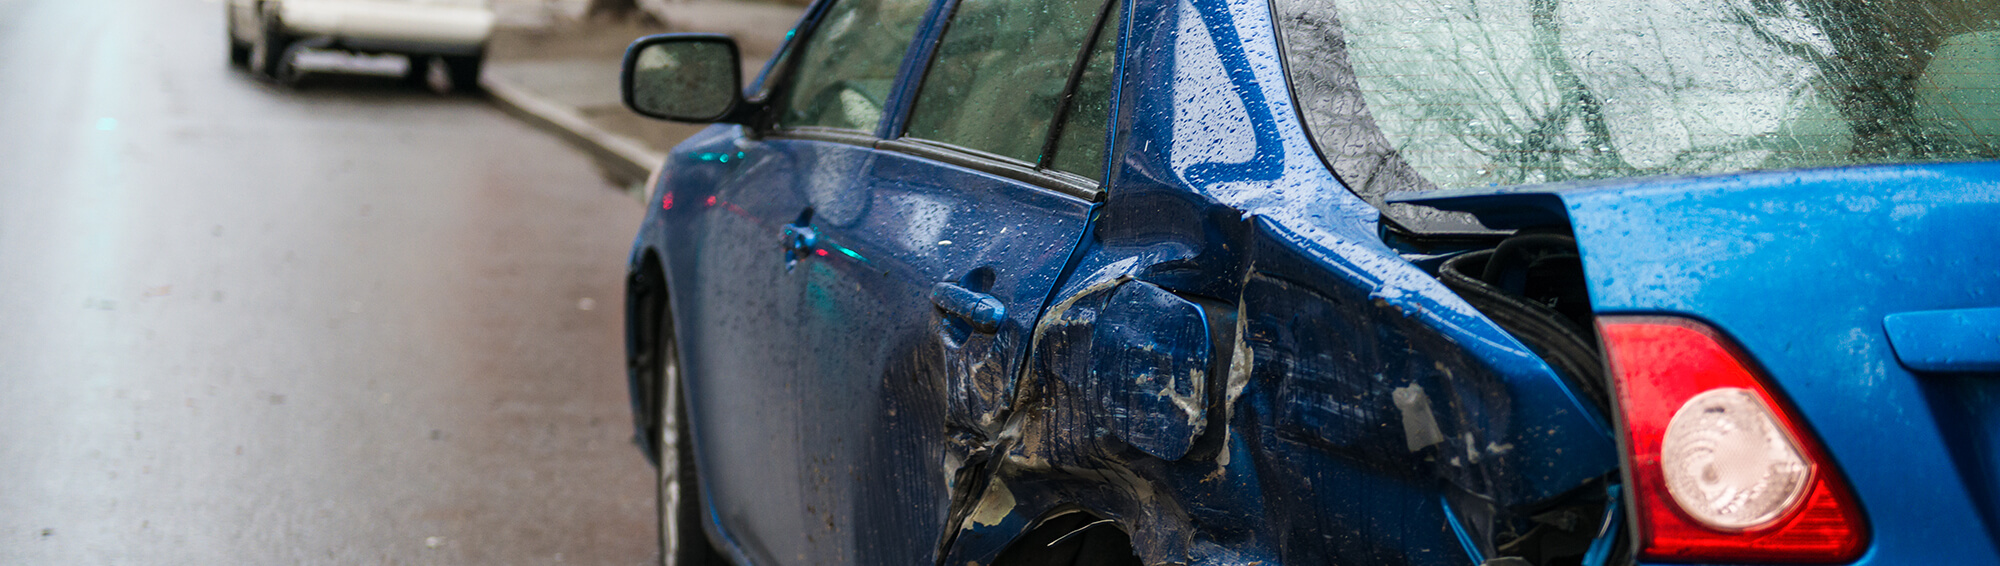 Young Drivers: Are You Aware of Your Increased Risks?